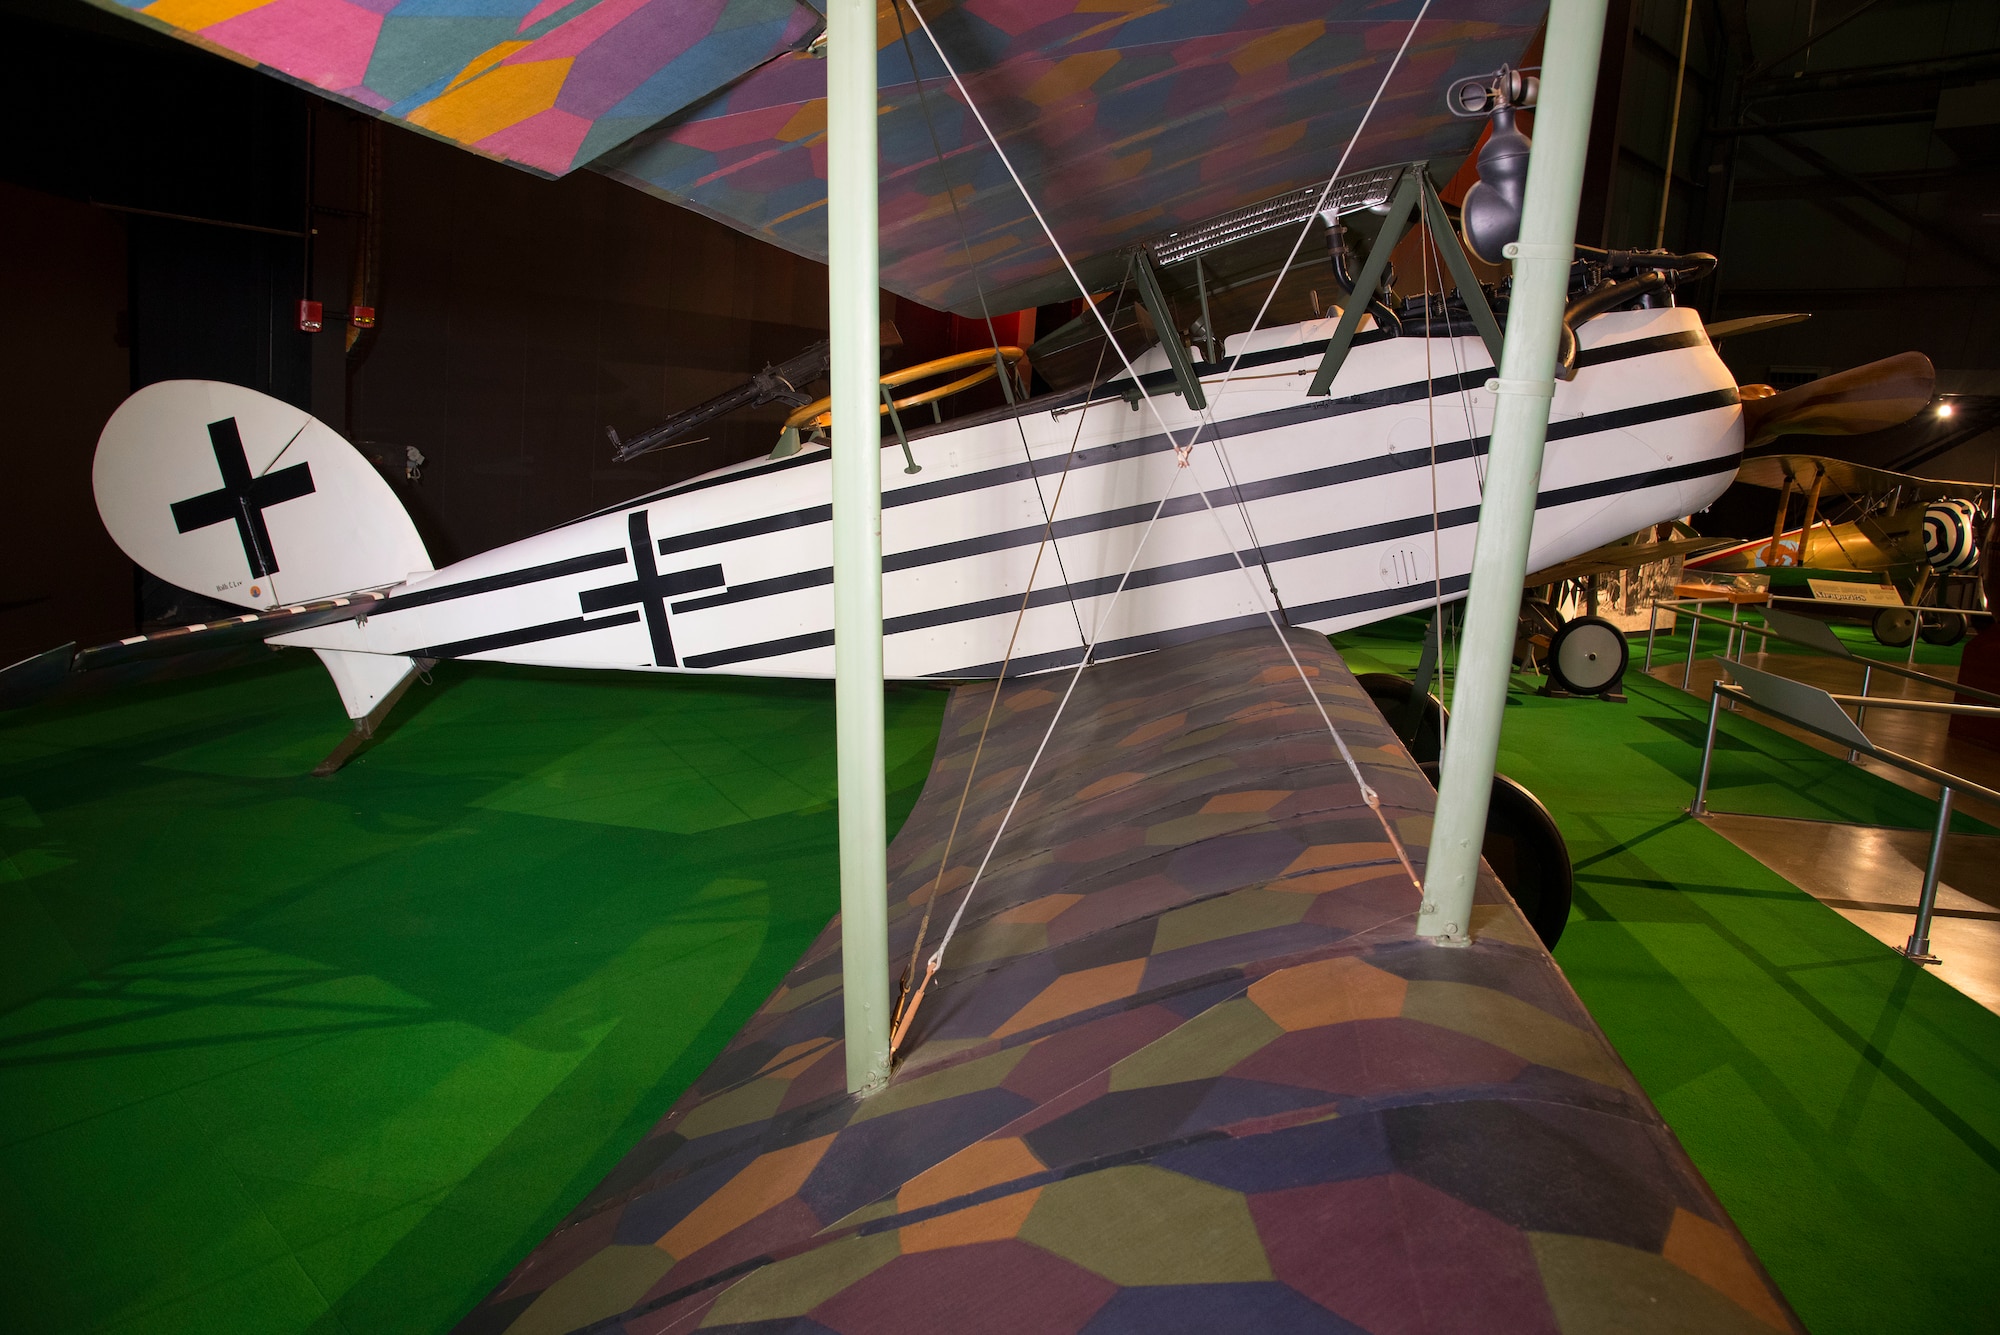 DAYTON, Ohio -- Halberstadt CL IV in the Early Years Gallery at the National Museum of the United States Air Force. (U.S. Air Force photo by Ken LaRock)